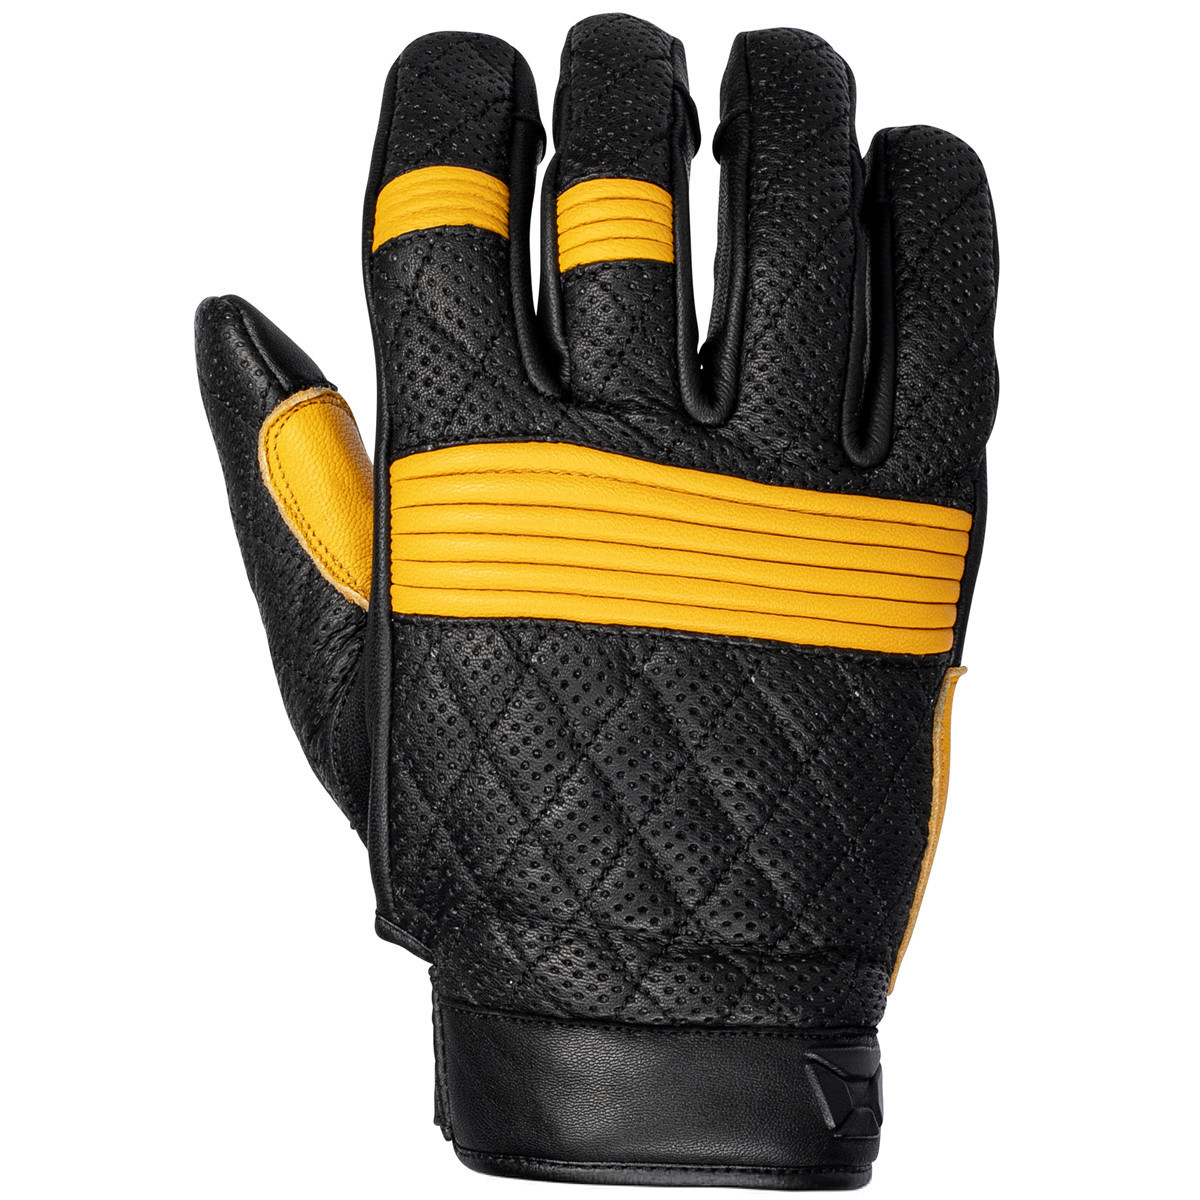 Cortech DX 3 Mens Street Motorcycle Gloves Black/Yellow/10 Large 8313-0303-06 